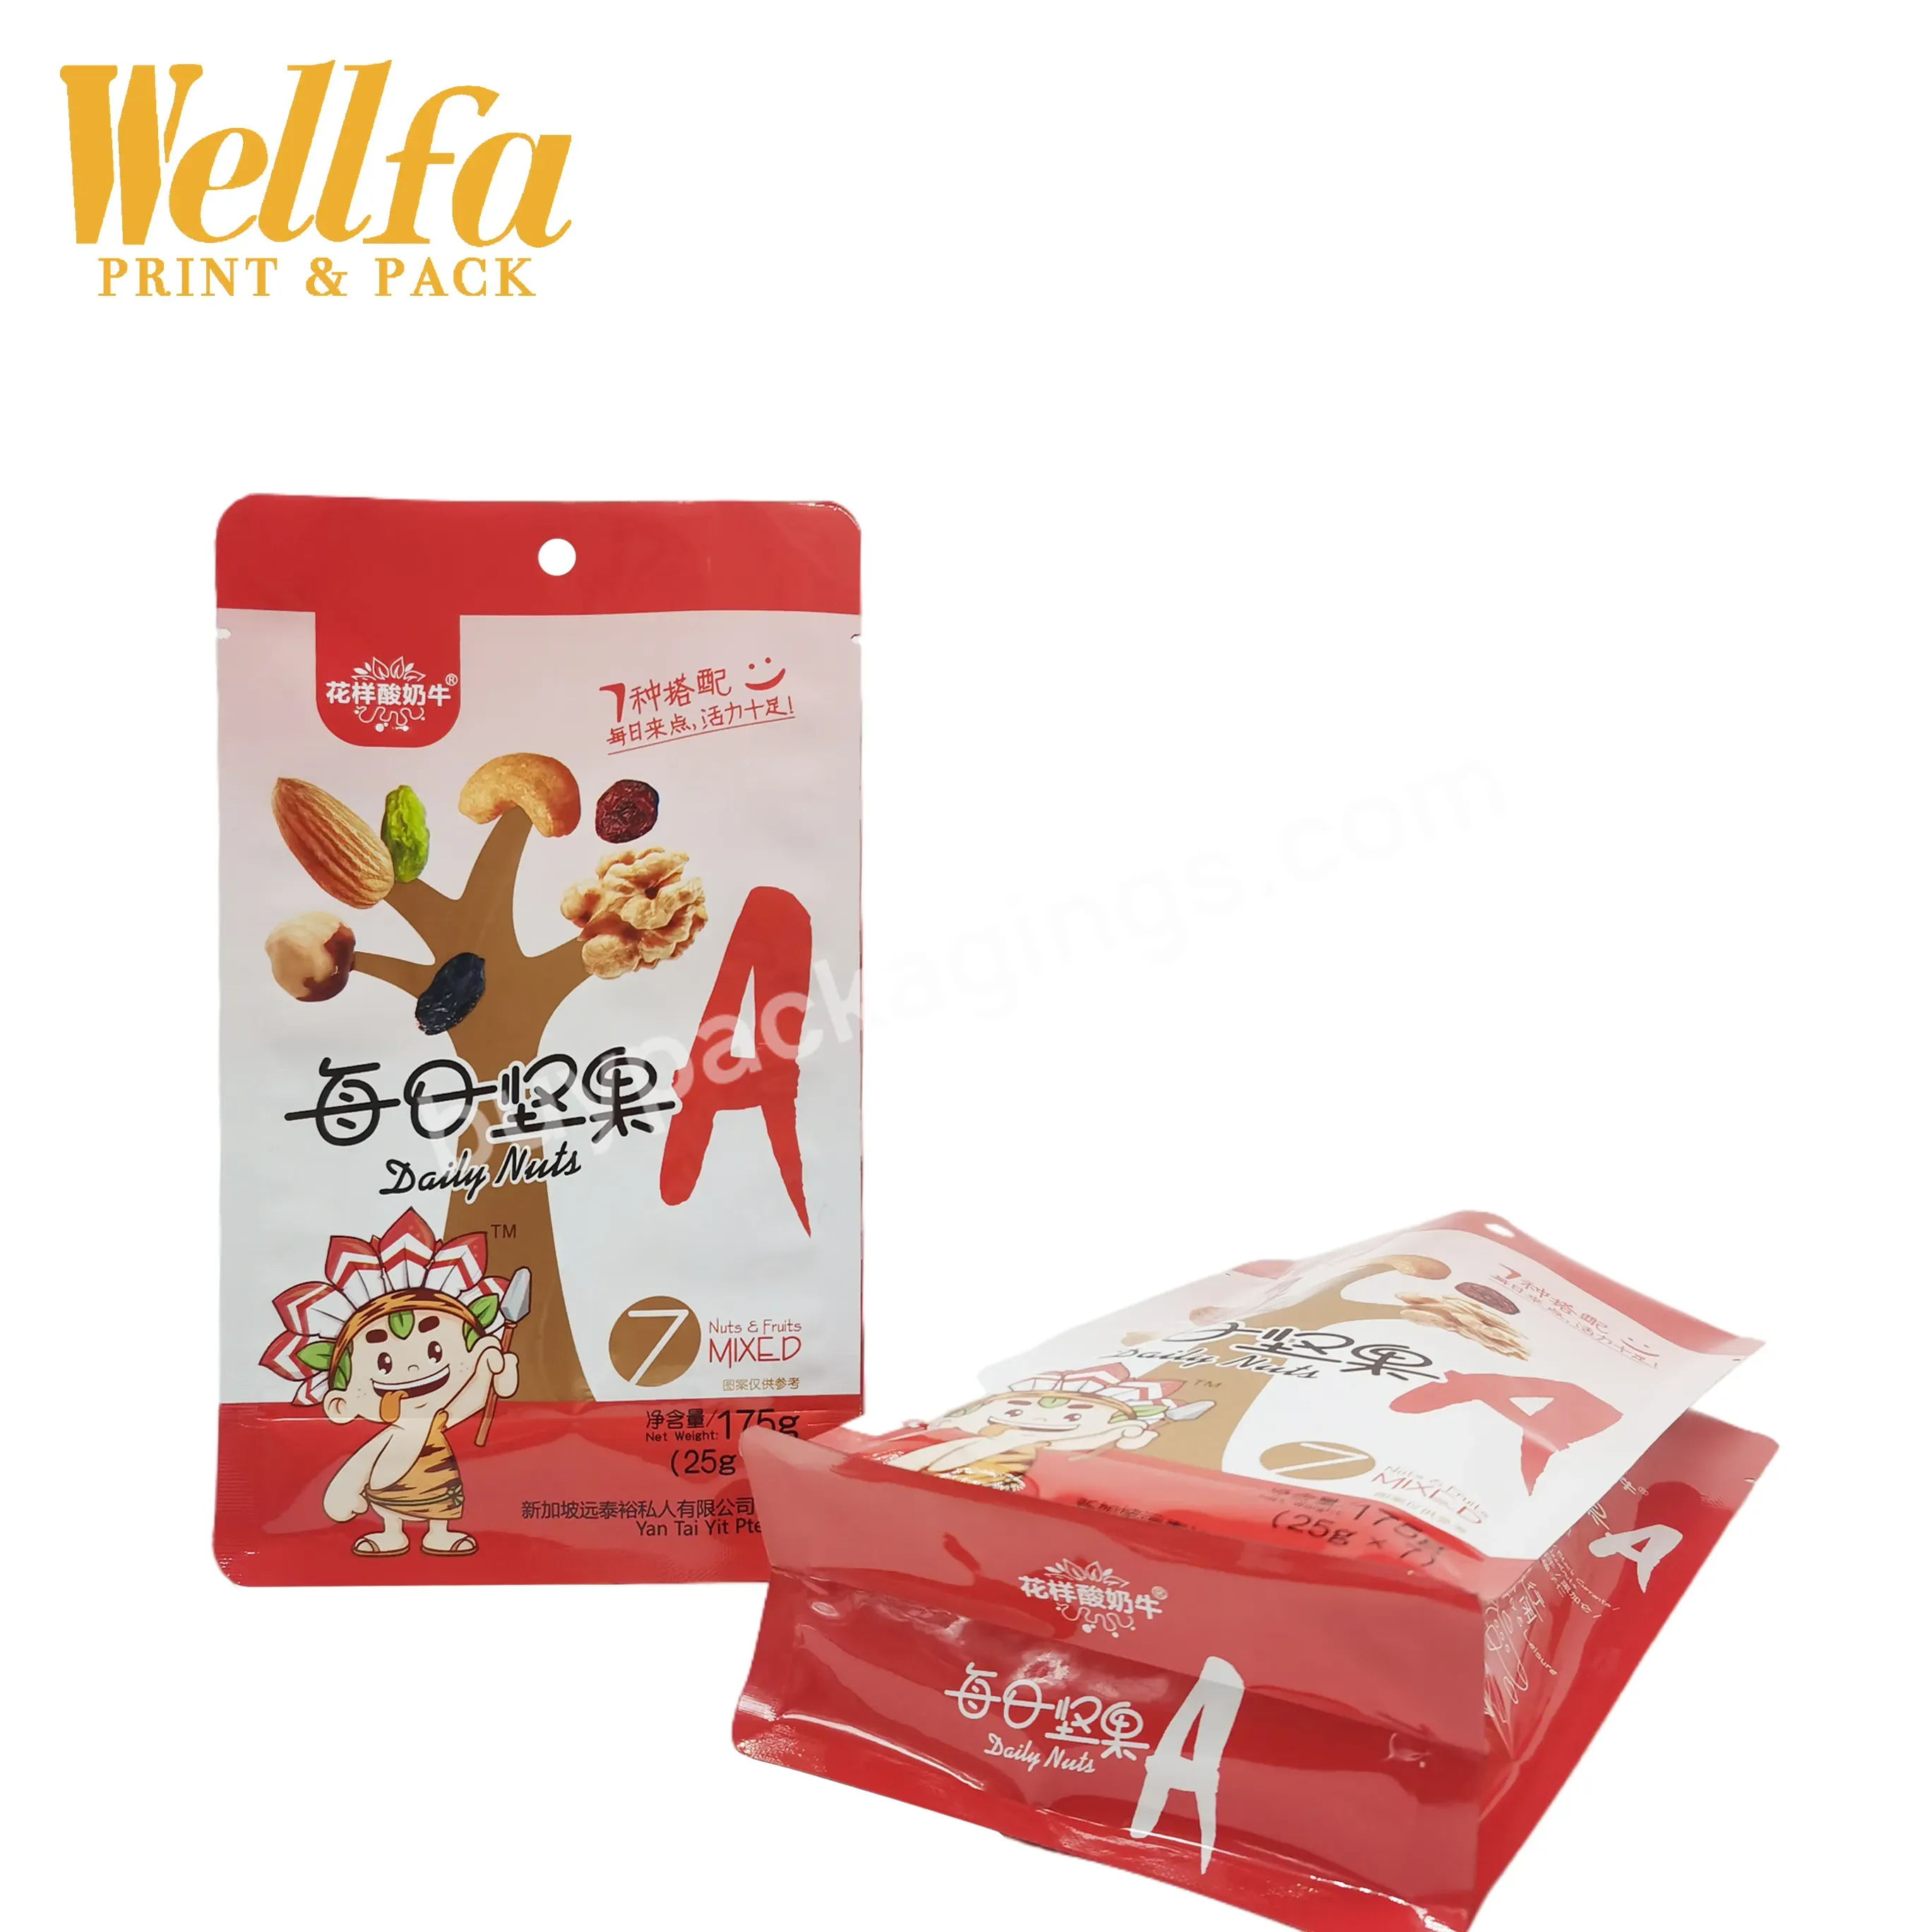 Oem Custom 500g 1kg Paper/plastic Flat Bottom Pouch Chocolate Powder /nut/ Meat/spices/pet Food Grade Packaging - Buy Customized Nut/milk Powder Packaging,Spice Protein Powder Pouch,Paper Material Food Grade Packaging Bag.